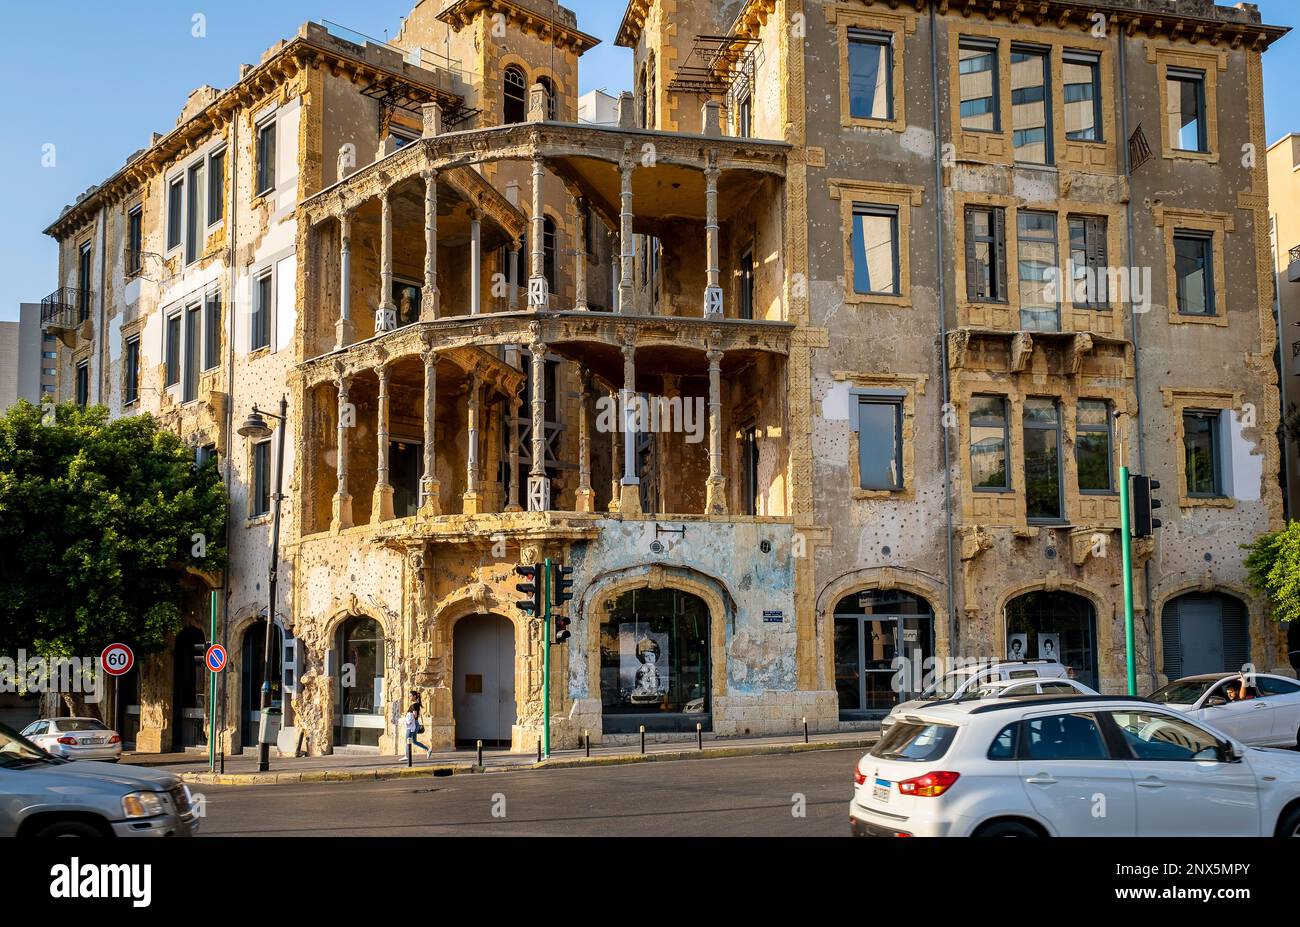 The Yellow House, also called Barakat building or Beit Beirut, Cultural Center dedicated to the historical memory of the Civil War, Beirut. Lebanon. Stock Photo